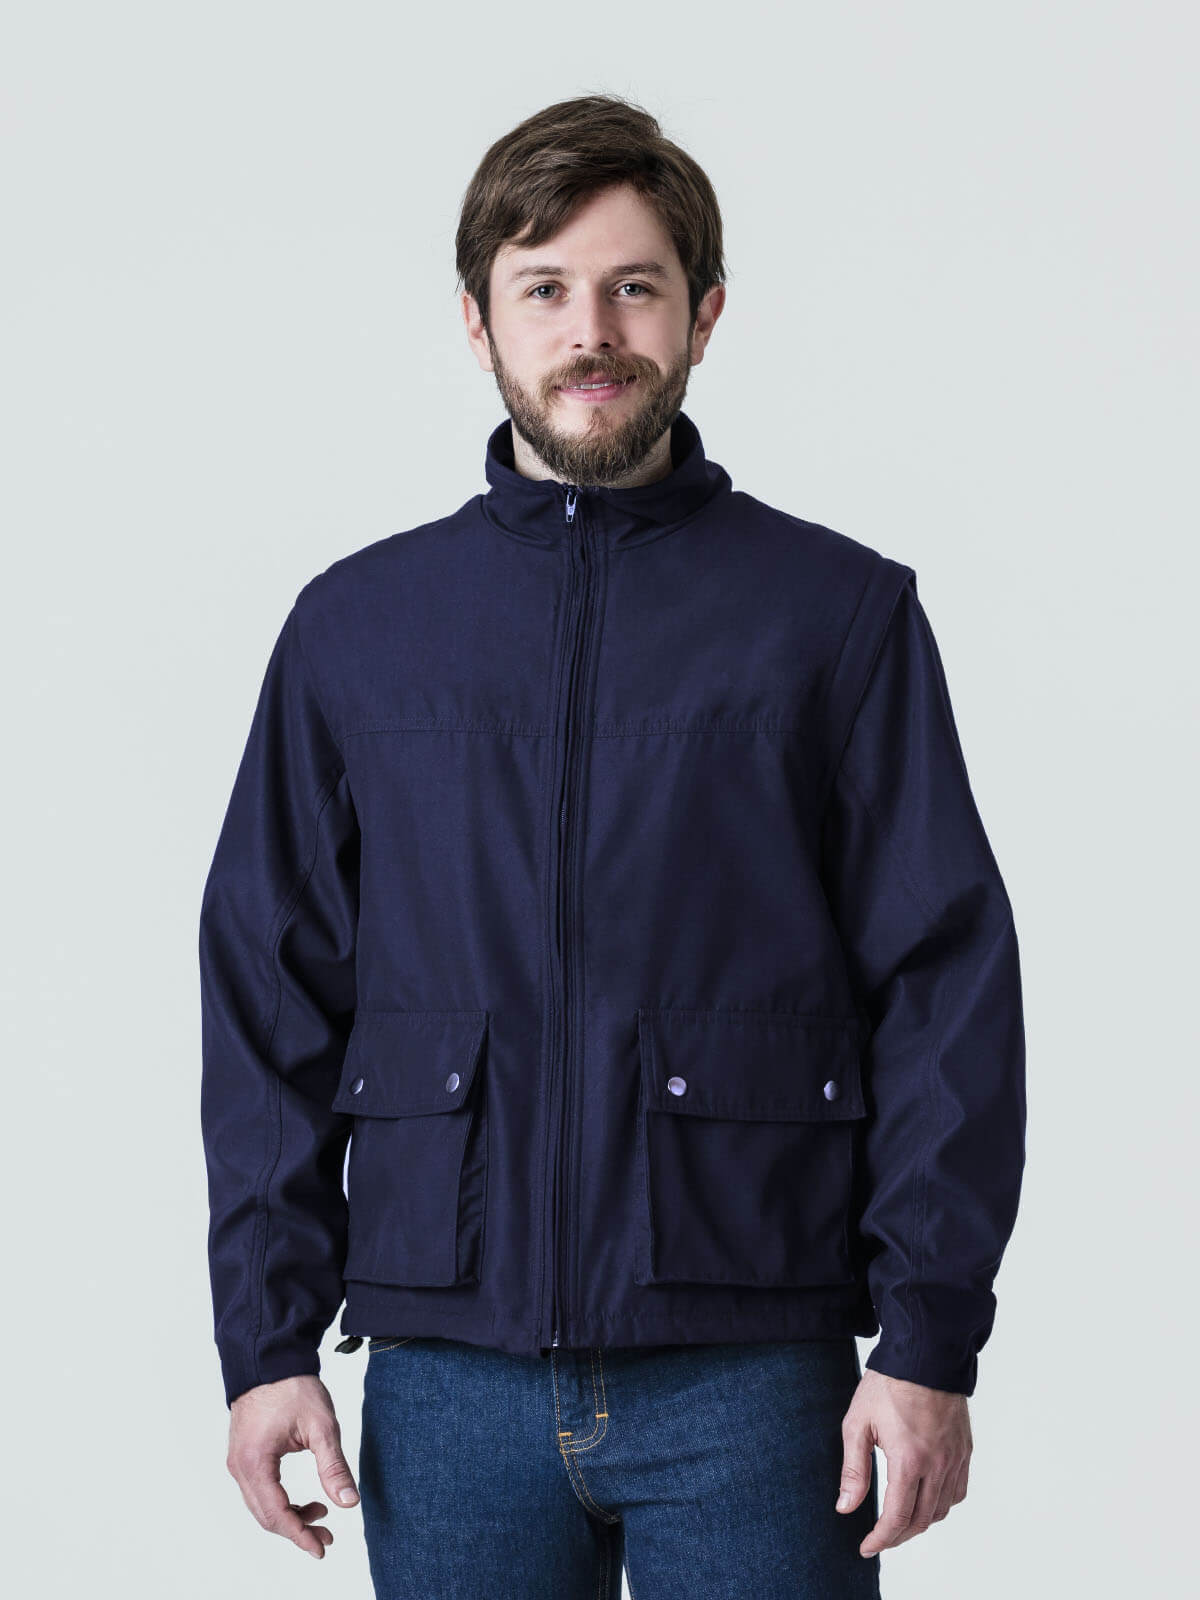 jacket with removable sleeves in navy